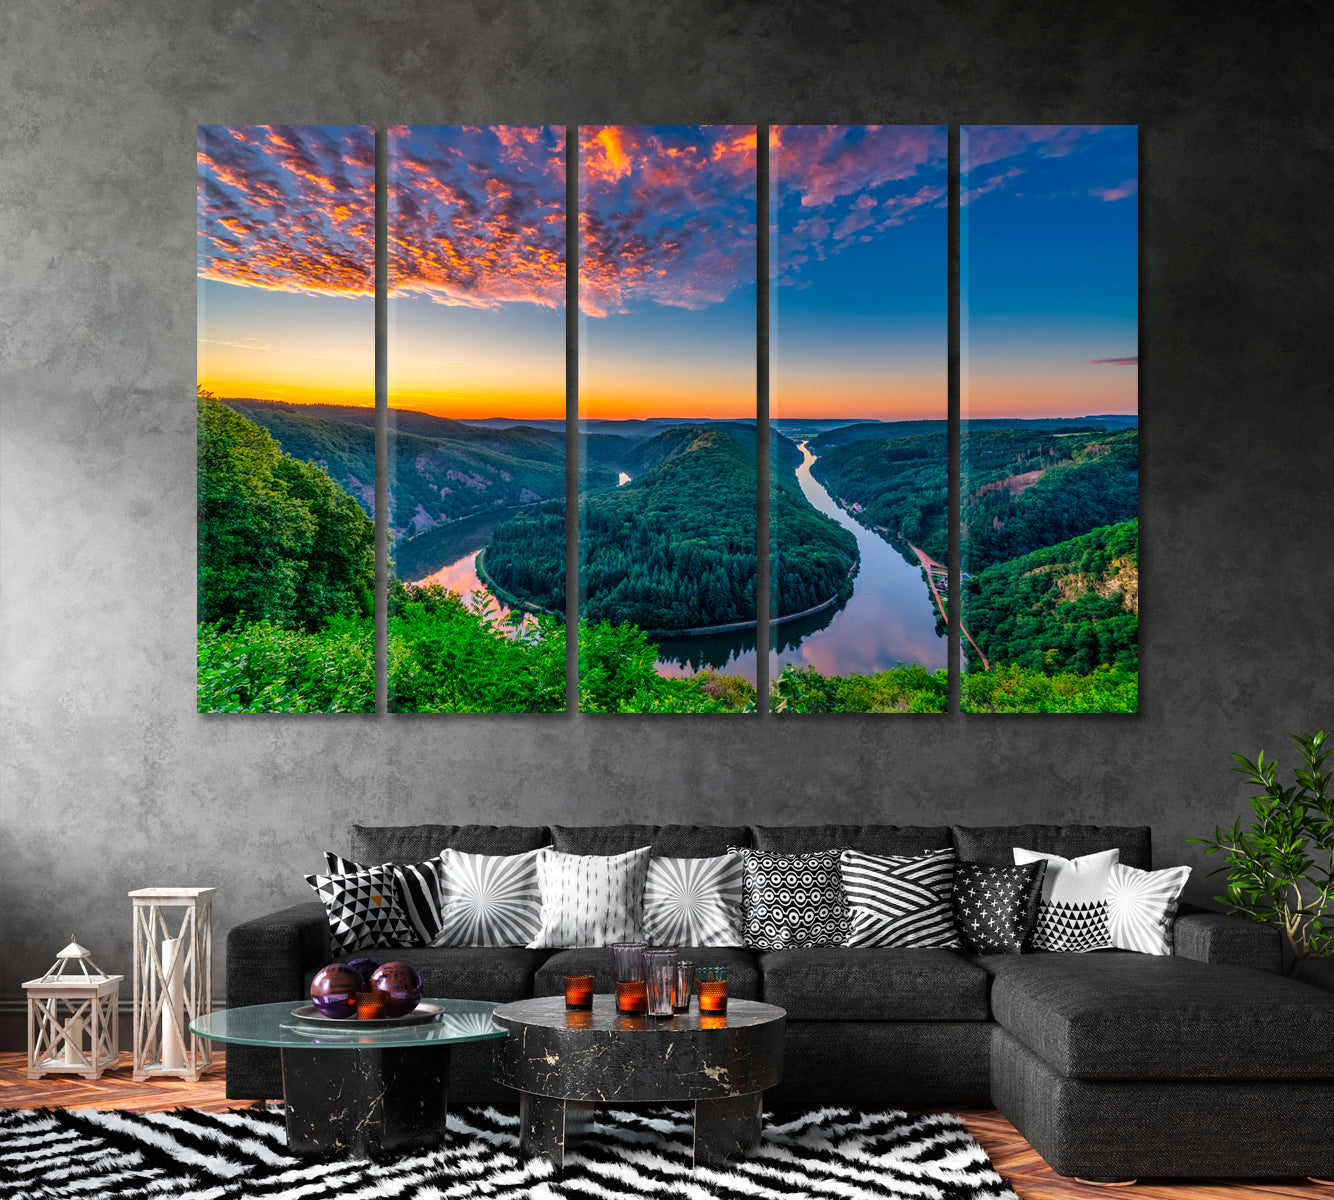 Saar River Valley South Germany Canvas Print ArtLexy 5 Panels 36"x24" inches 